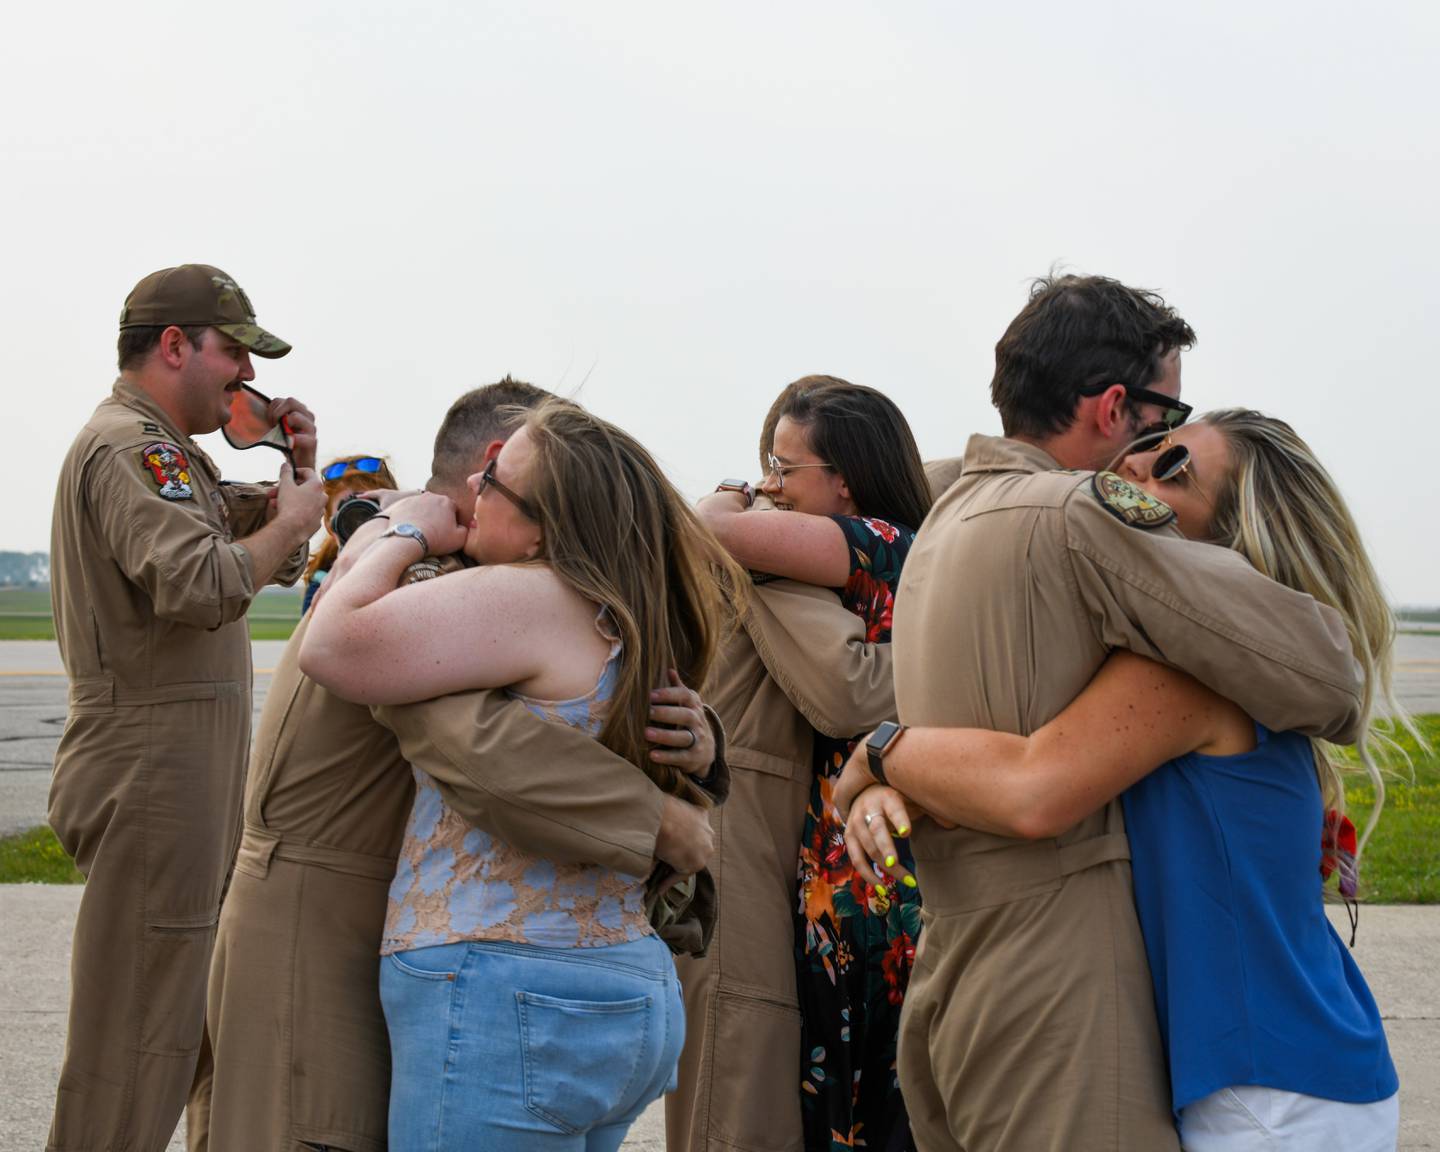 Spouses at Minot Air Force Base, North Dakota, reunited with their husbands who safely returned from deployment on Sept. 10, 2021. The aircrews that arrived were from the 23rd Bomb Squadron. (Airman 1st Class Saomy Sabournin/Air Force)